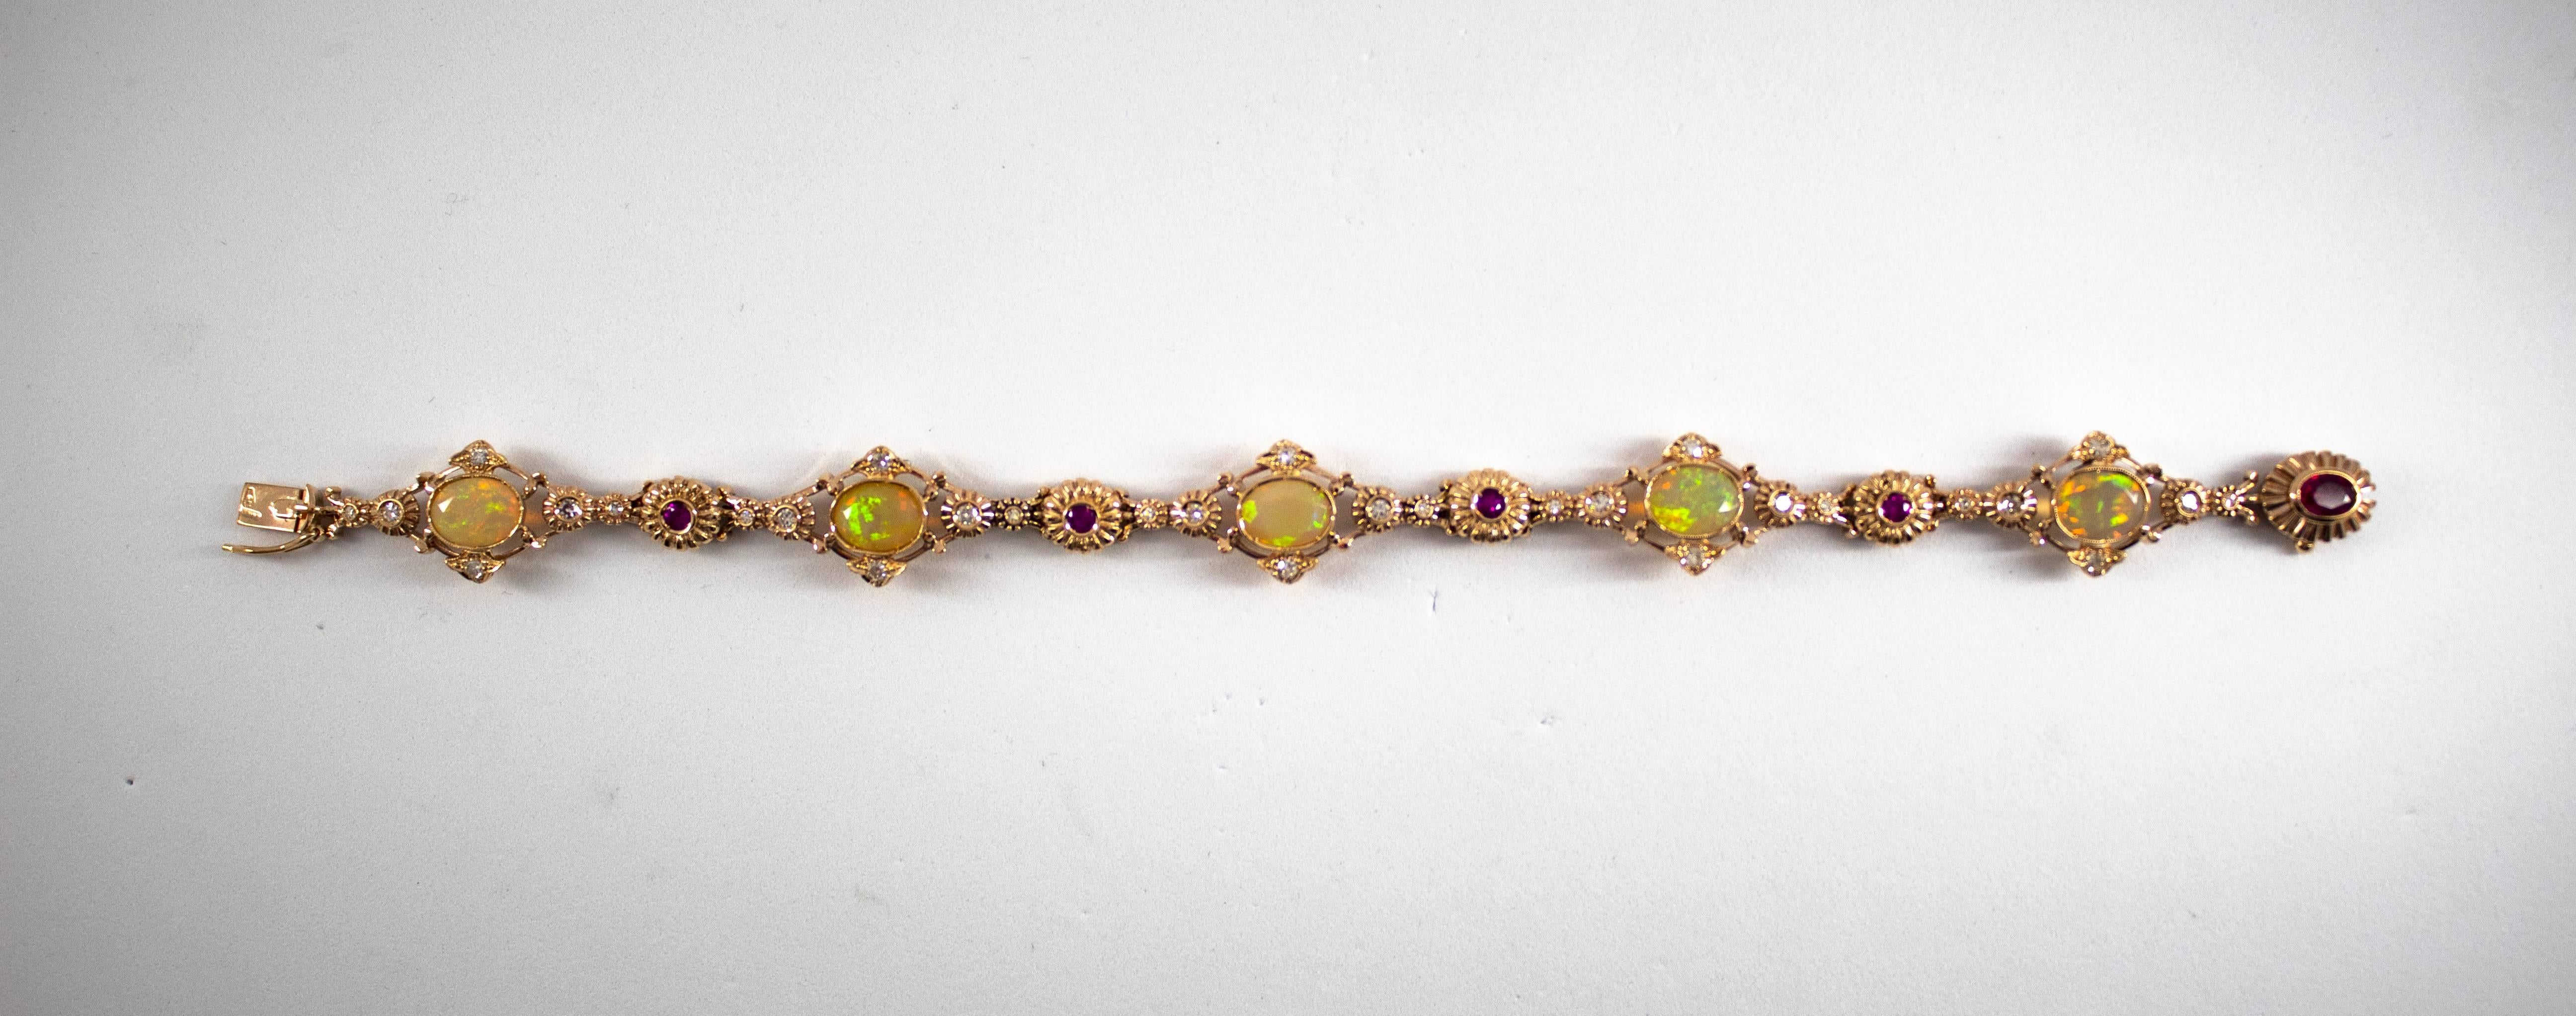 This Bracelet is made of 14K Yellow Gold.
This Bracelet has 0.50 Carats of White Diamonds.
This Bracelet has 0.80 Carats of Rubies.
This Bracelet has 3.50 Carats of Opals.
We're a workshop so every piece is handmade, customizable and resizable.